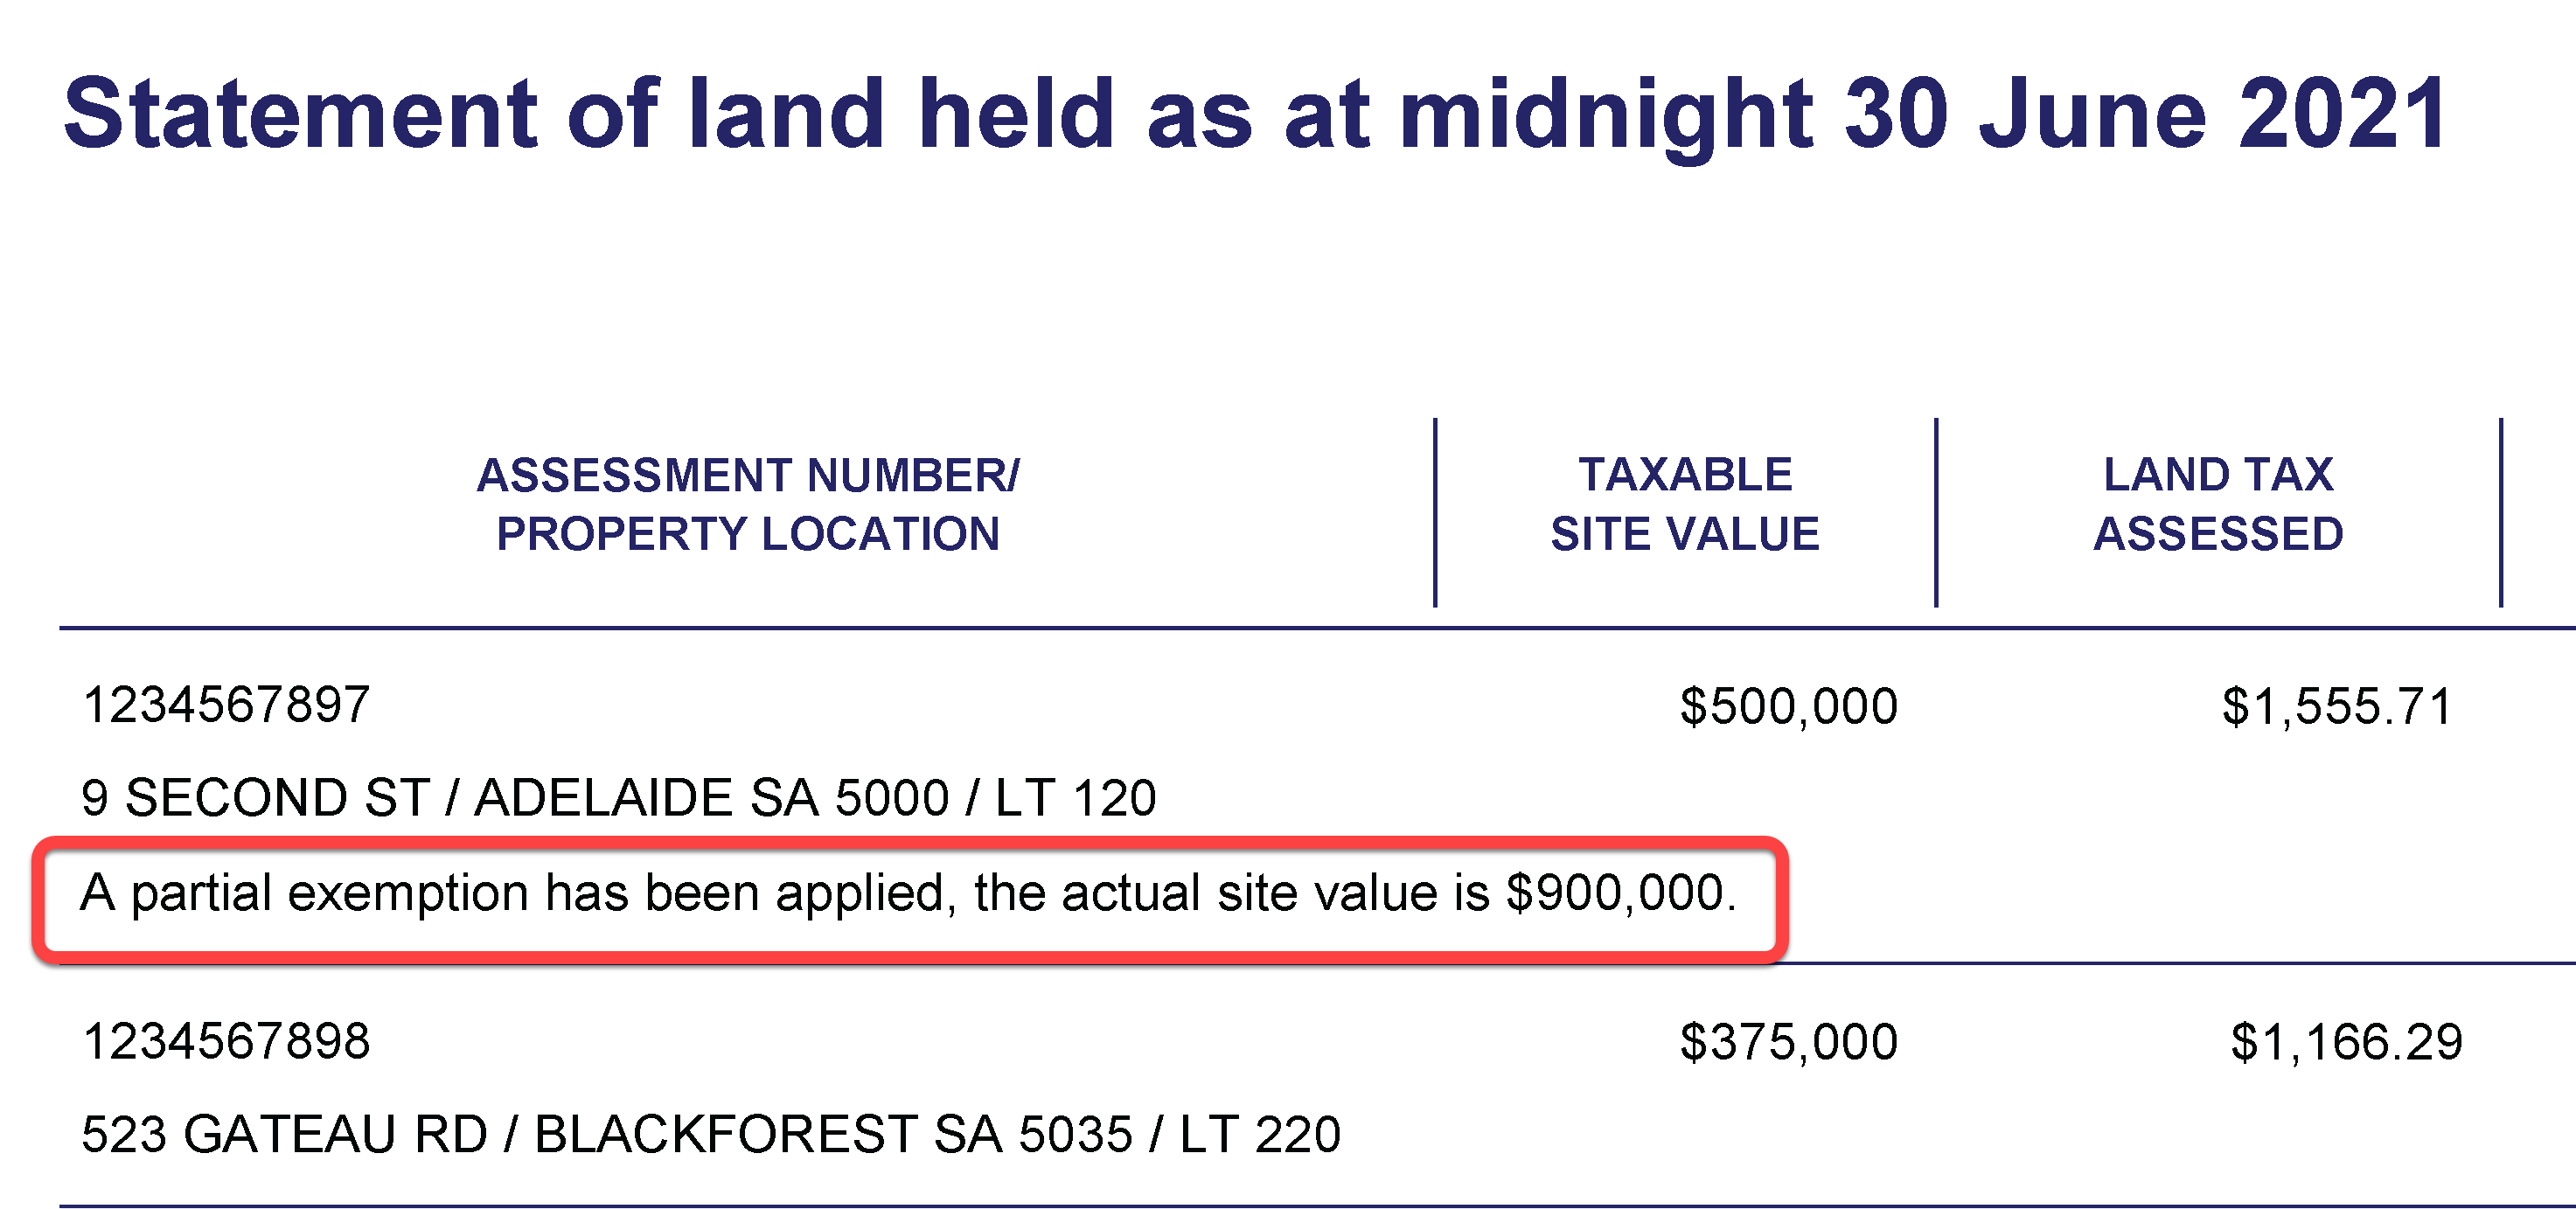 Red rectangle highlighting the words 'a partial exemption has been applied, the actual site value is $900,000' on a Statement of land held